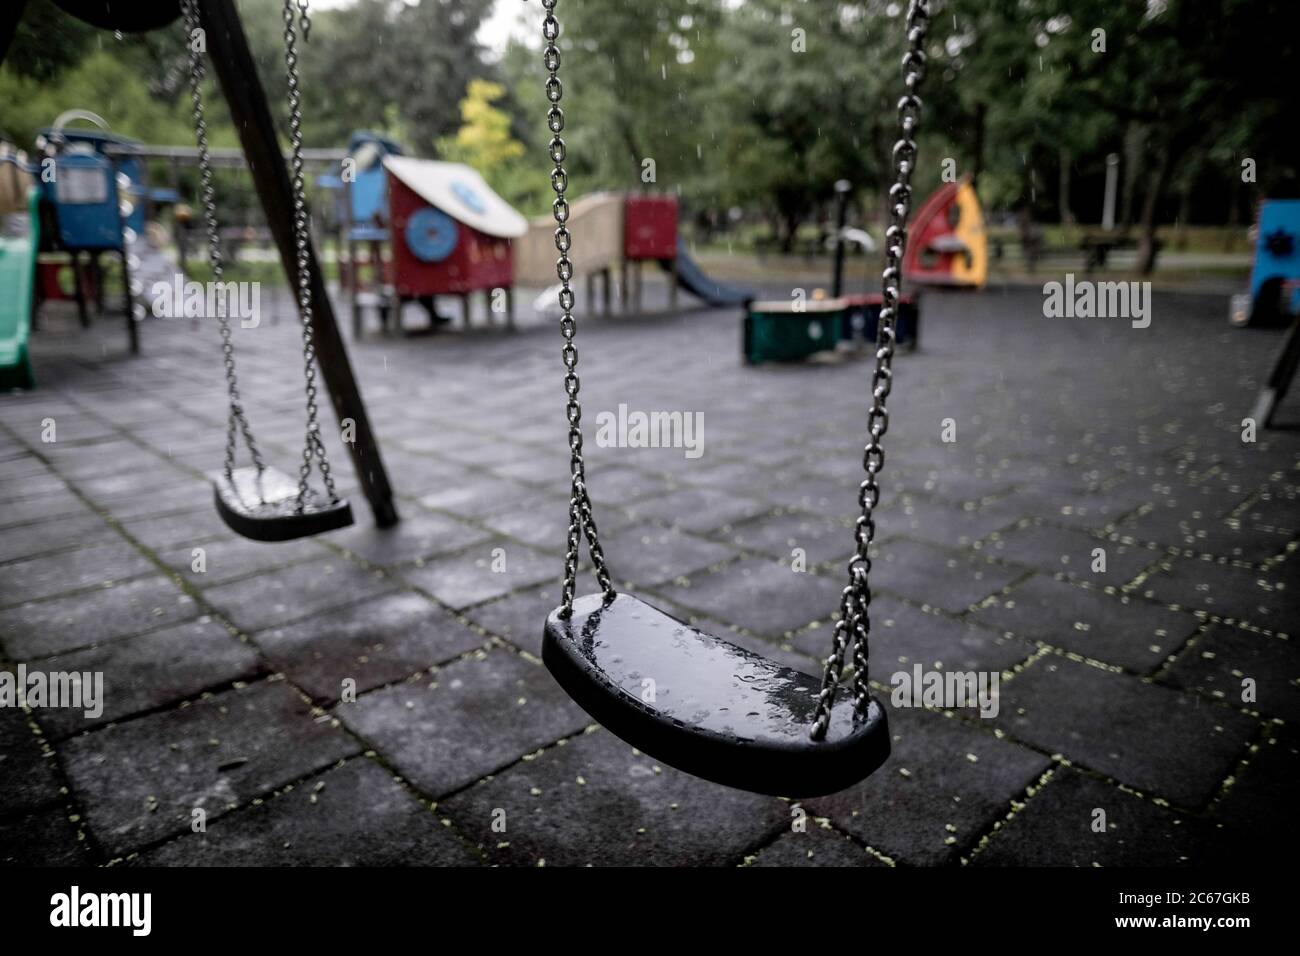 Plastic and wet swings in an empty playground during a rainy summer day. Stock Photo